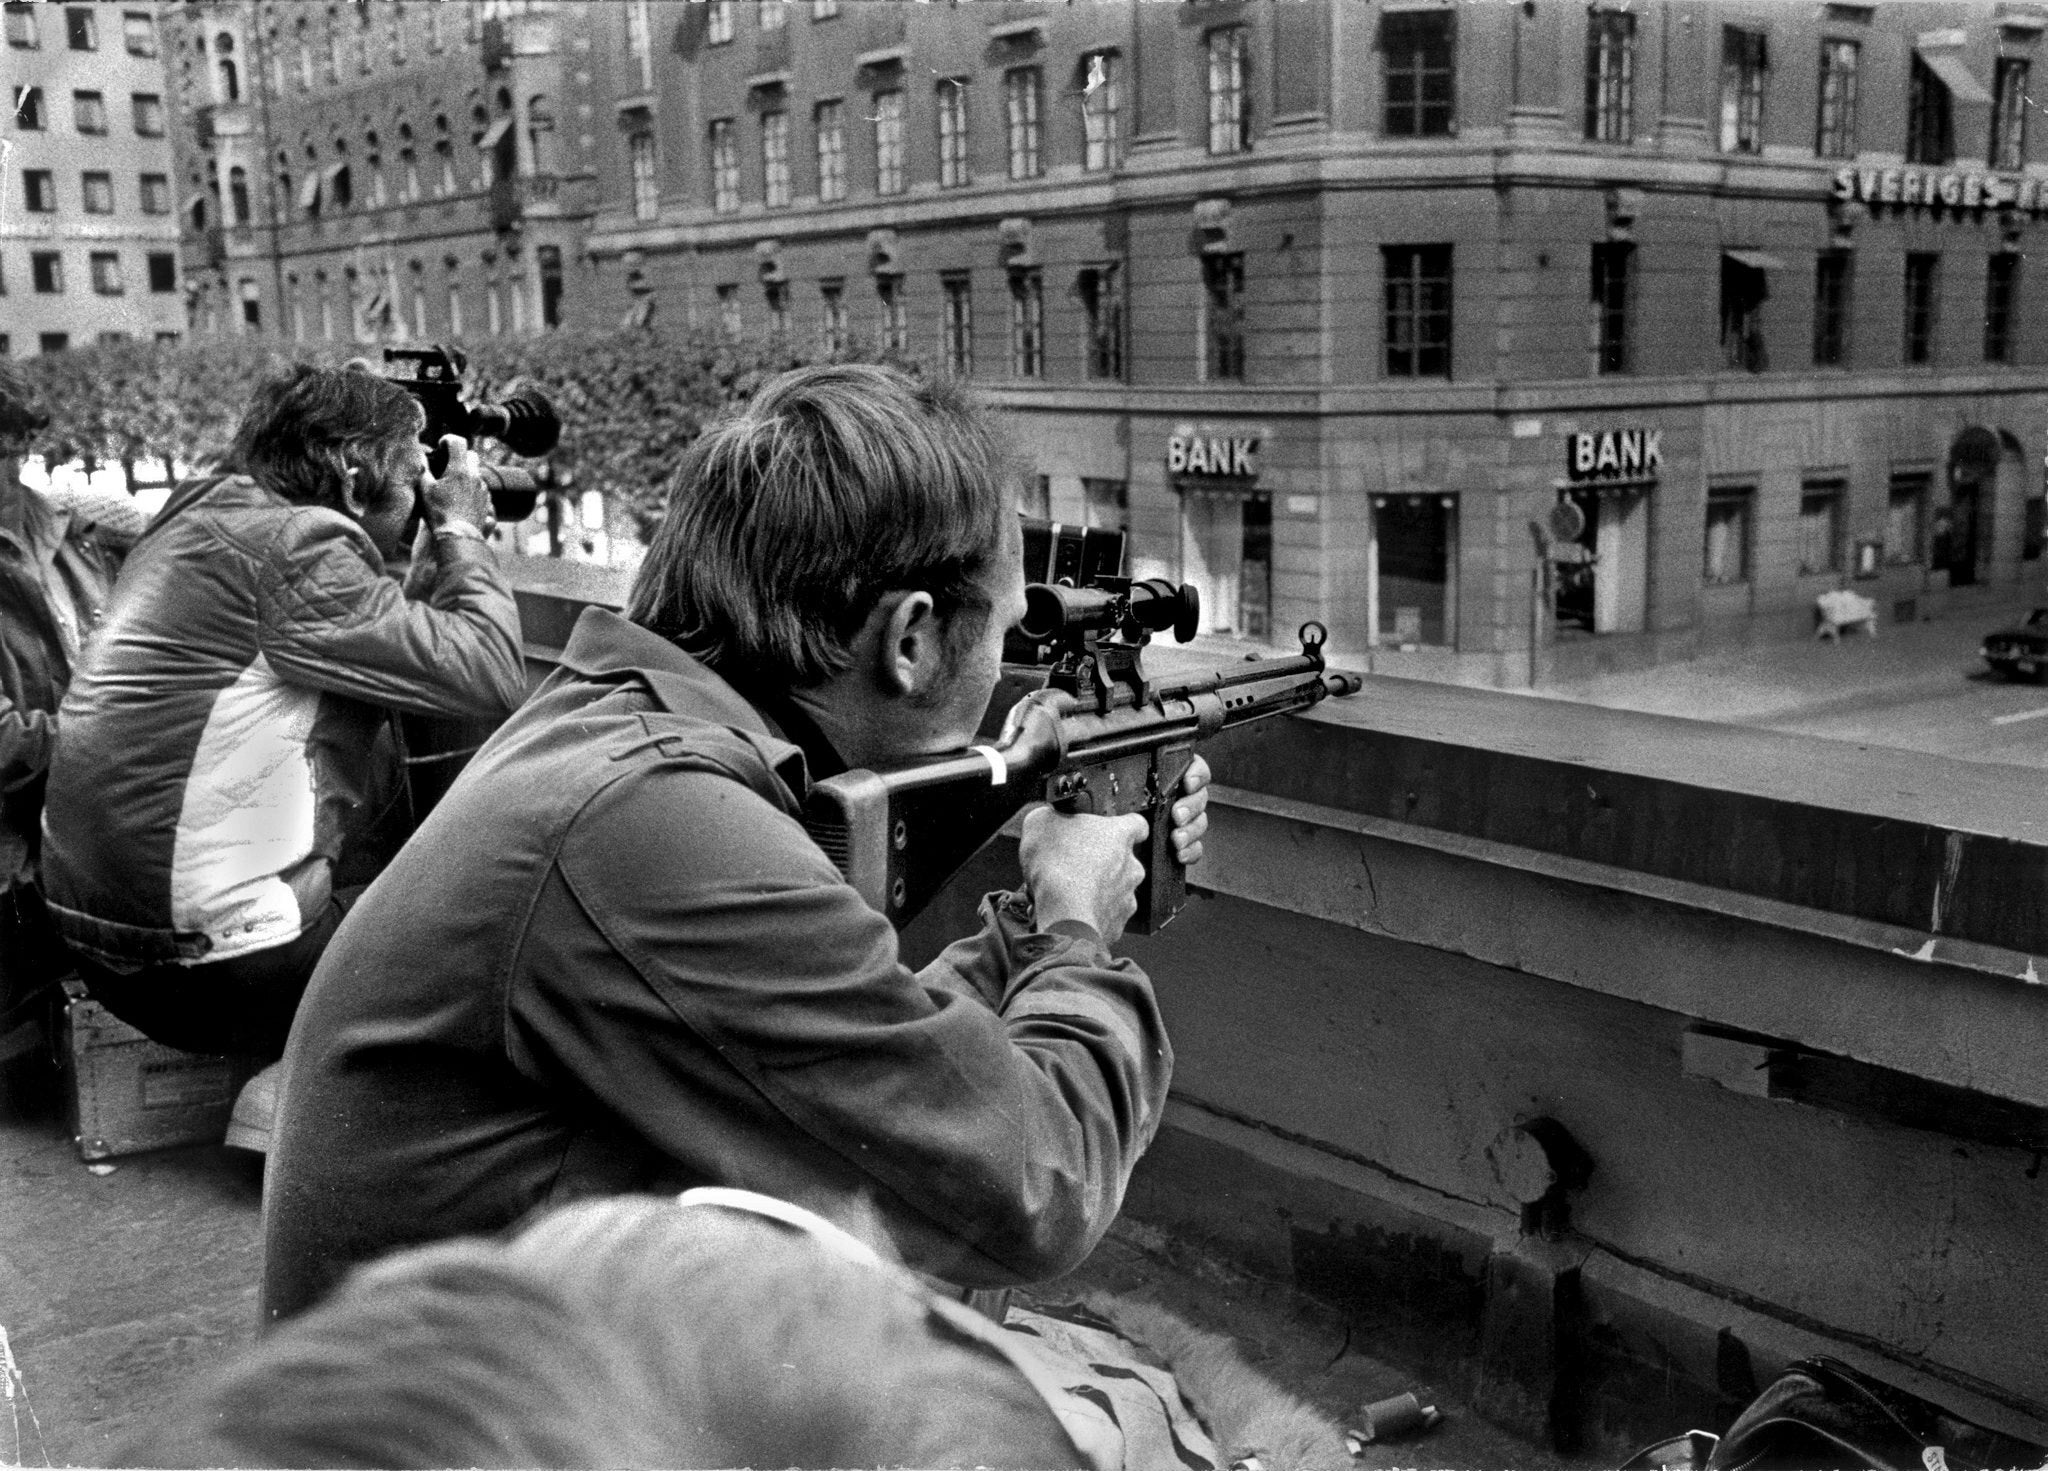 Press photographers and police snipers lie side-by-side on a roof opposite the Kreditbanken bank on Norrmalmstorg square in Stockholm on 24 August 1973. One of the hostages, Kristin Enmark, has said she feared being killed by police more than being harmed by the hostage-takers